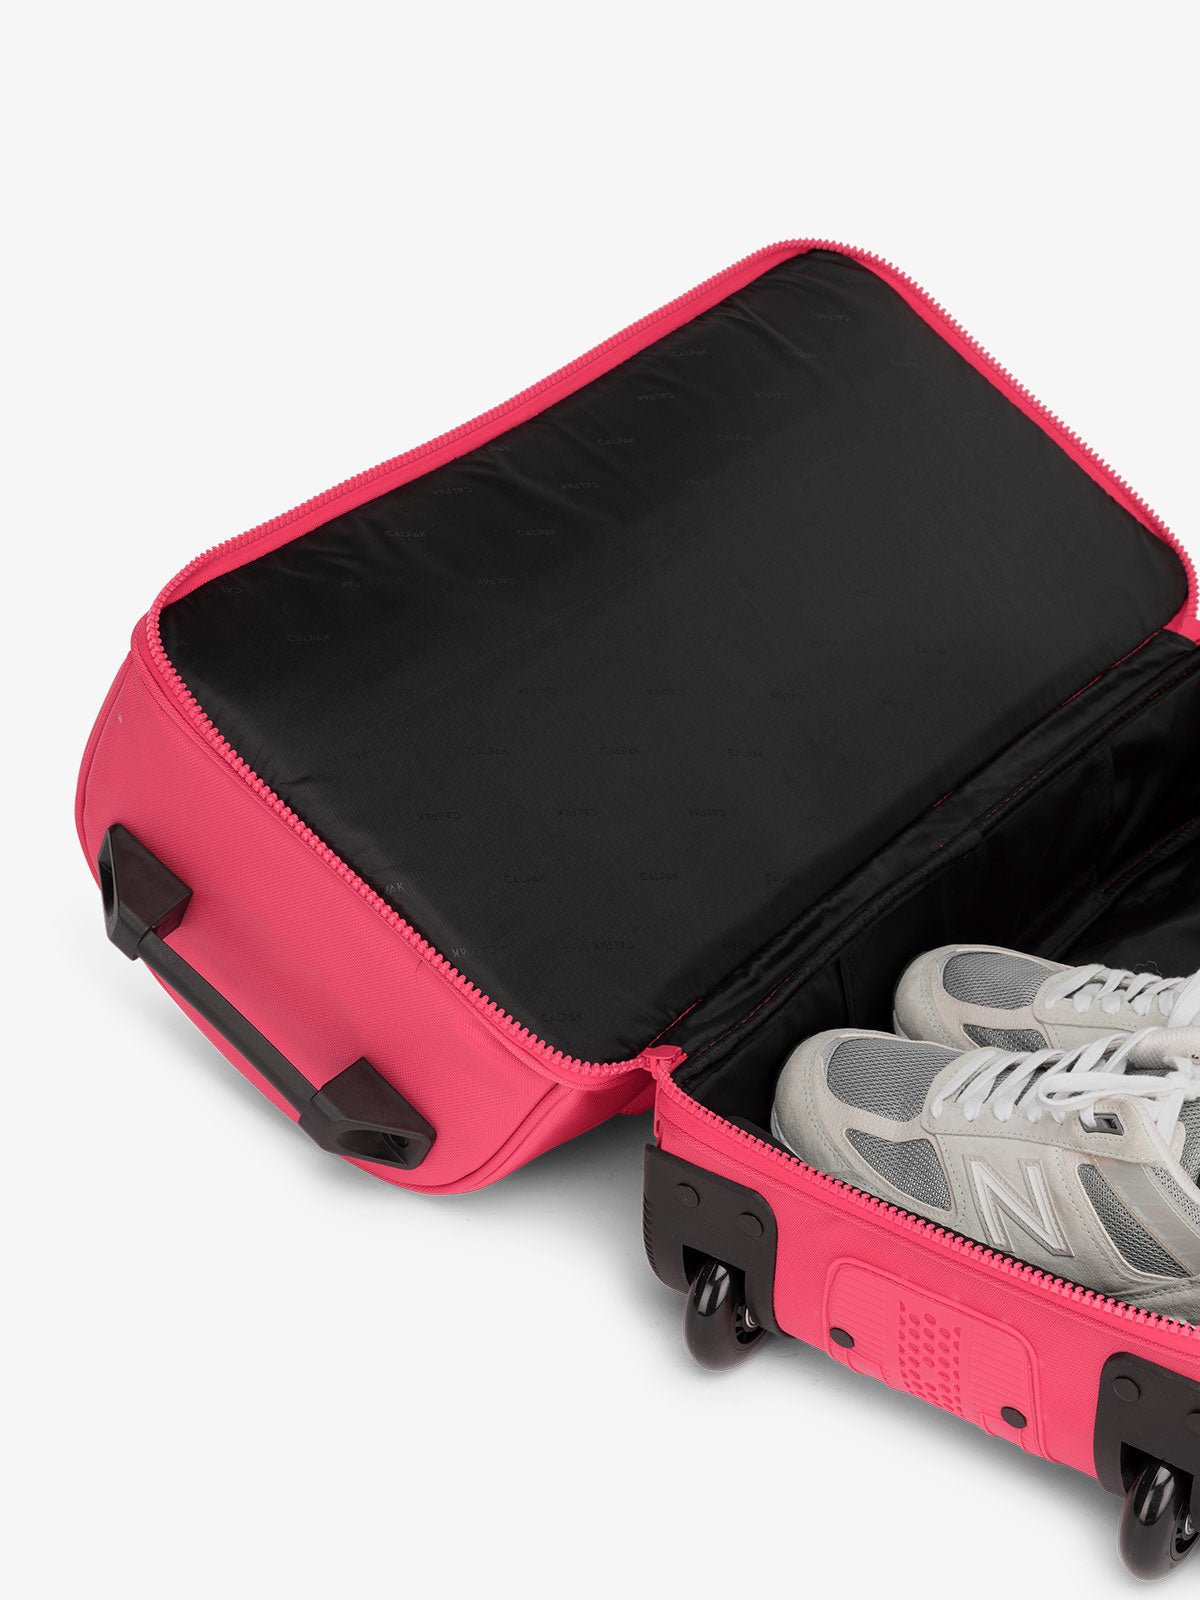 CALPAK Stevyn Rolling Duffle interior of shoe compartment in dragonfruit pink